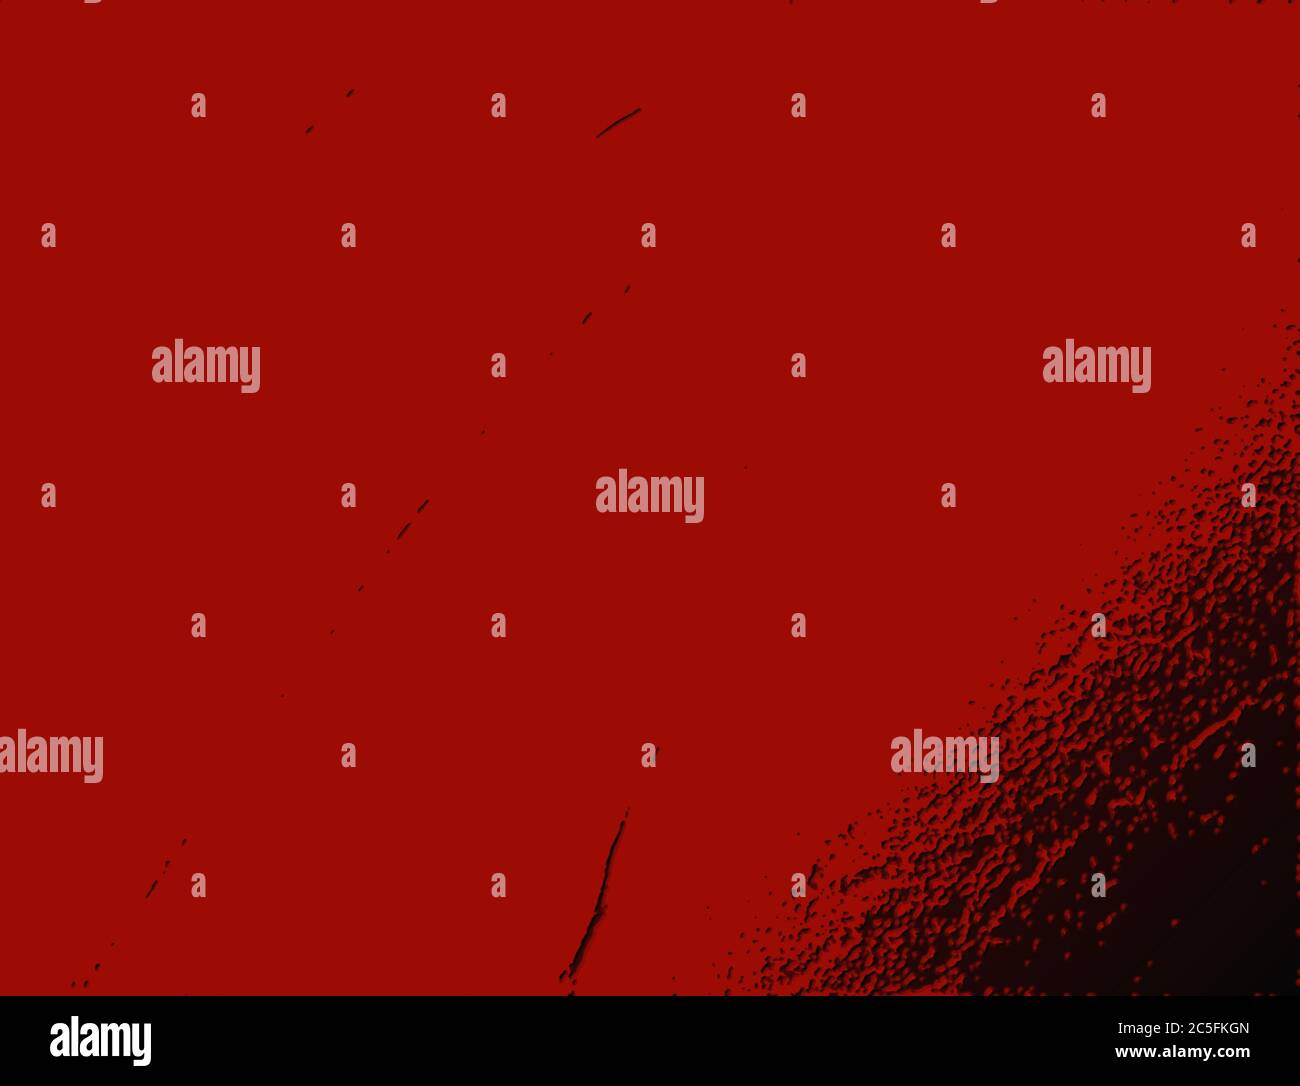 Abstract red and black background graphic with intentional imperfections in textured surface, blank area with space for text, copy Stock Photo